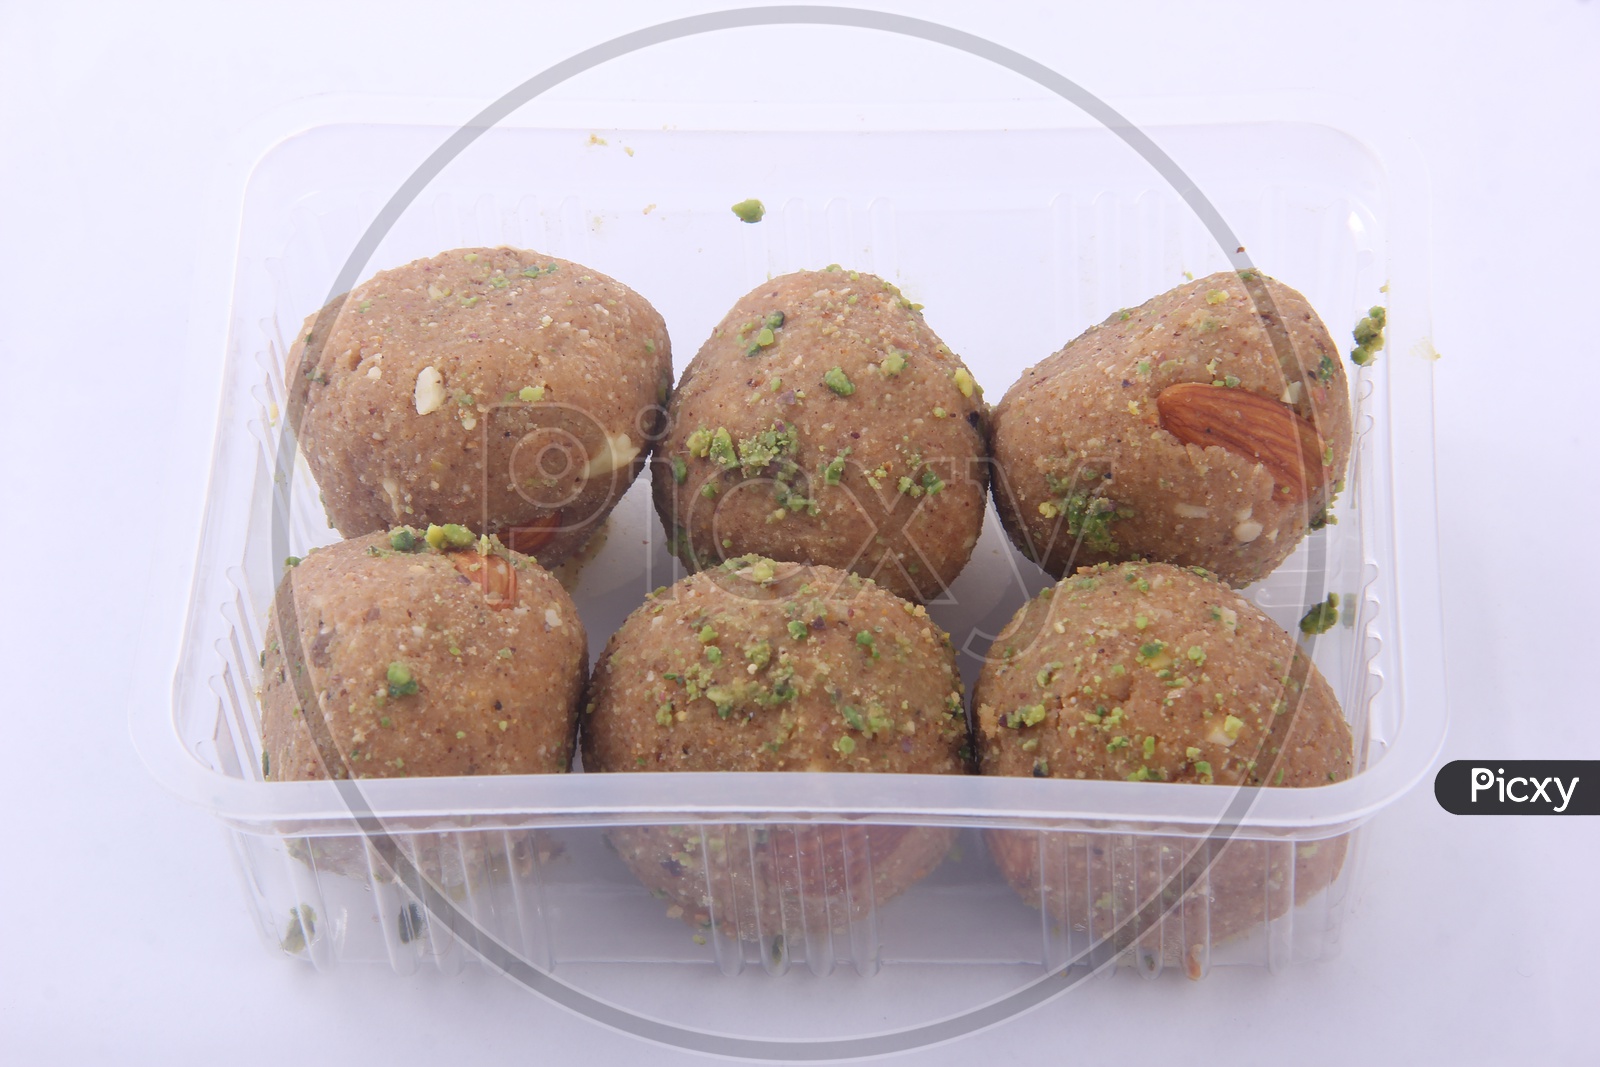 Laddu in a bowl and on White background  / Ladoo